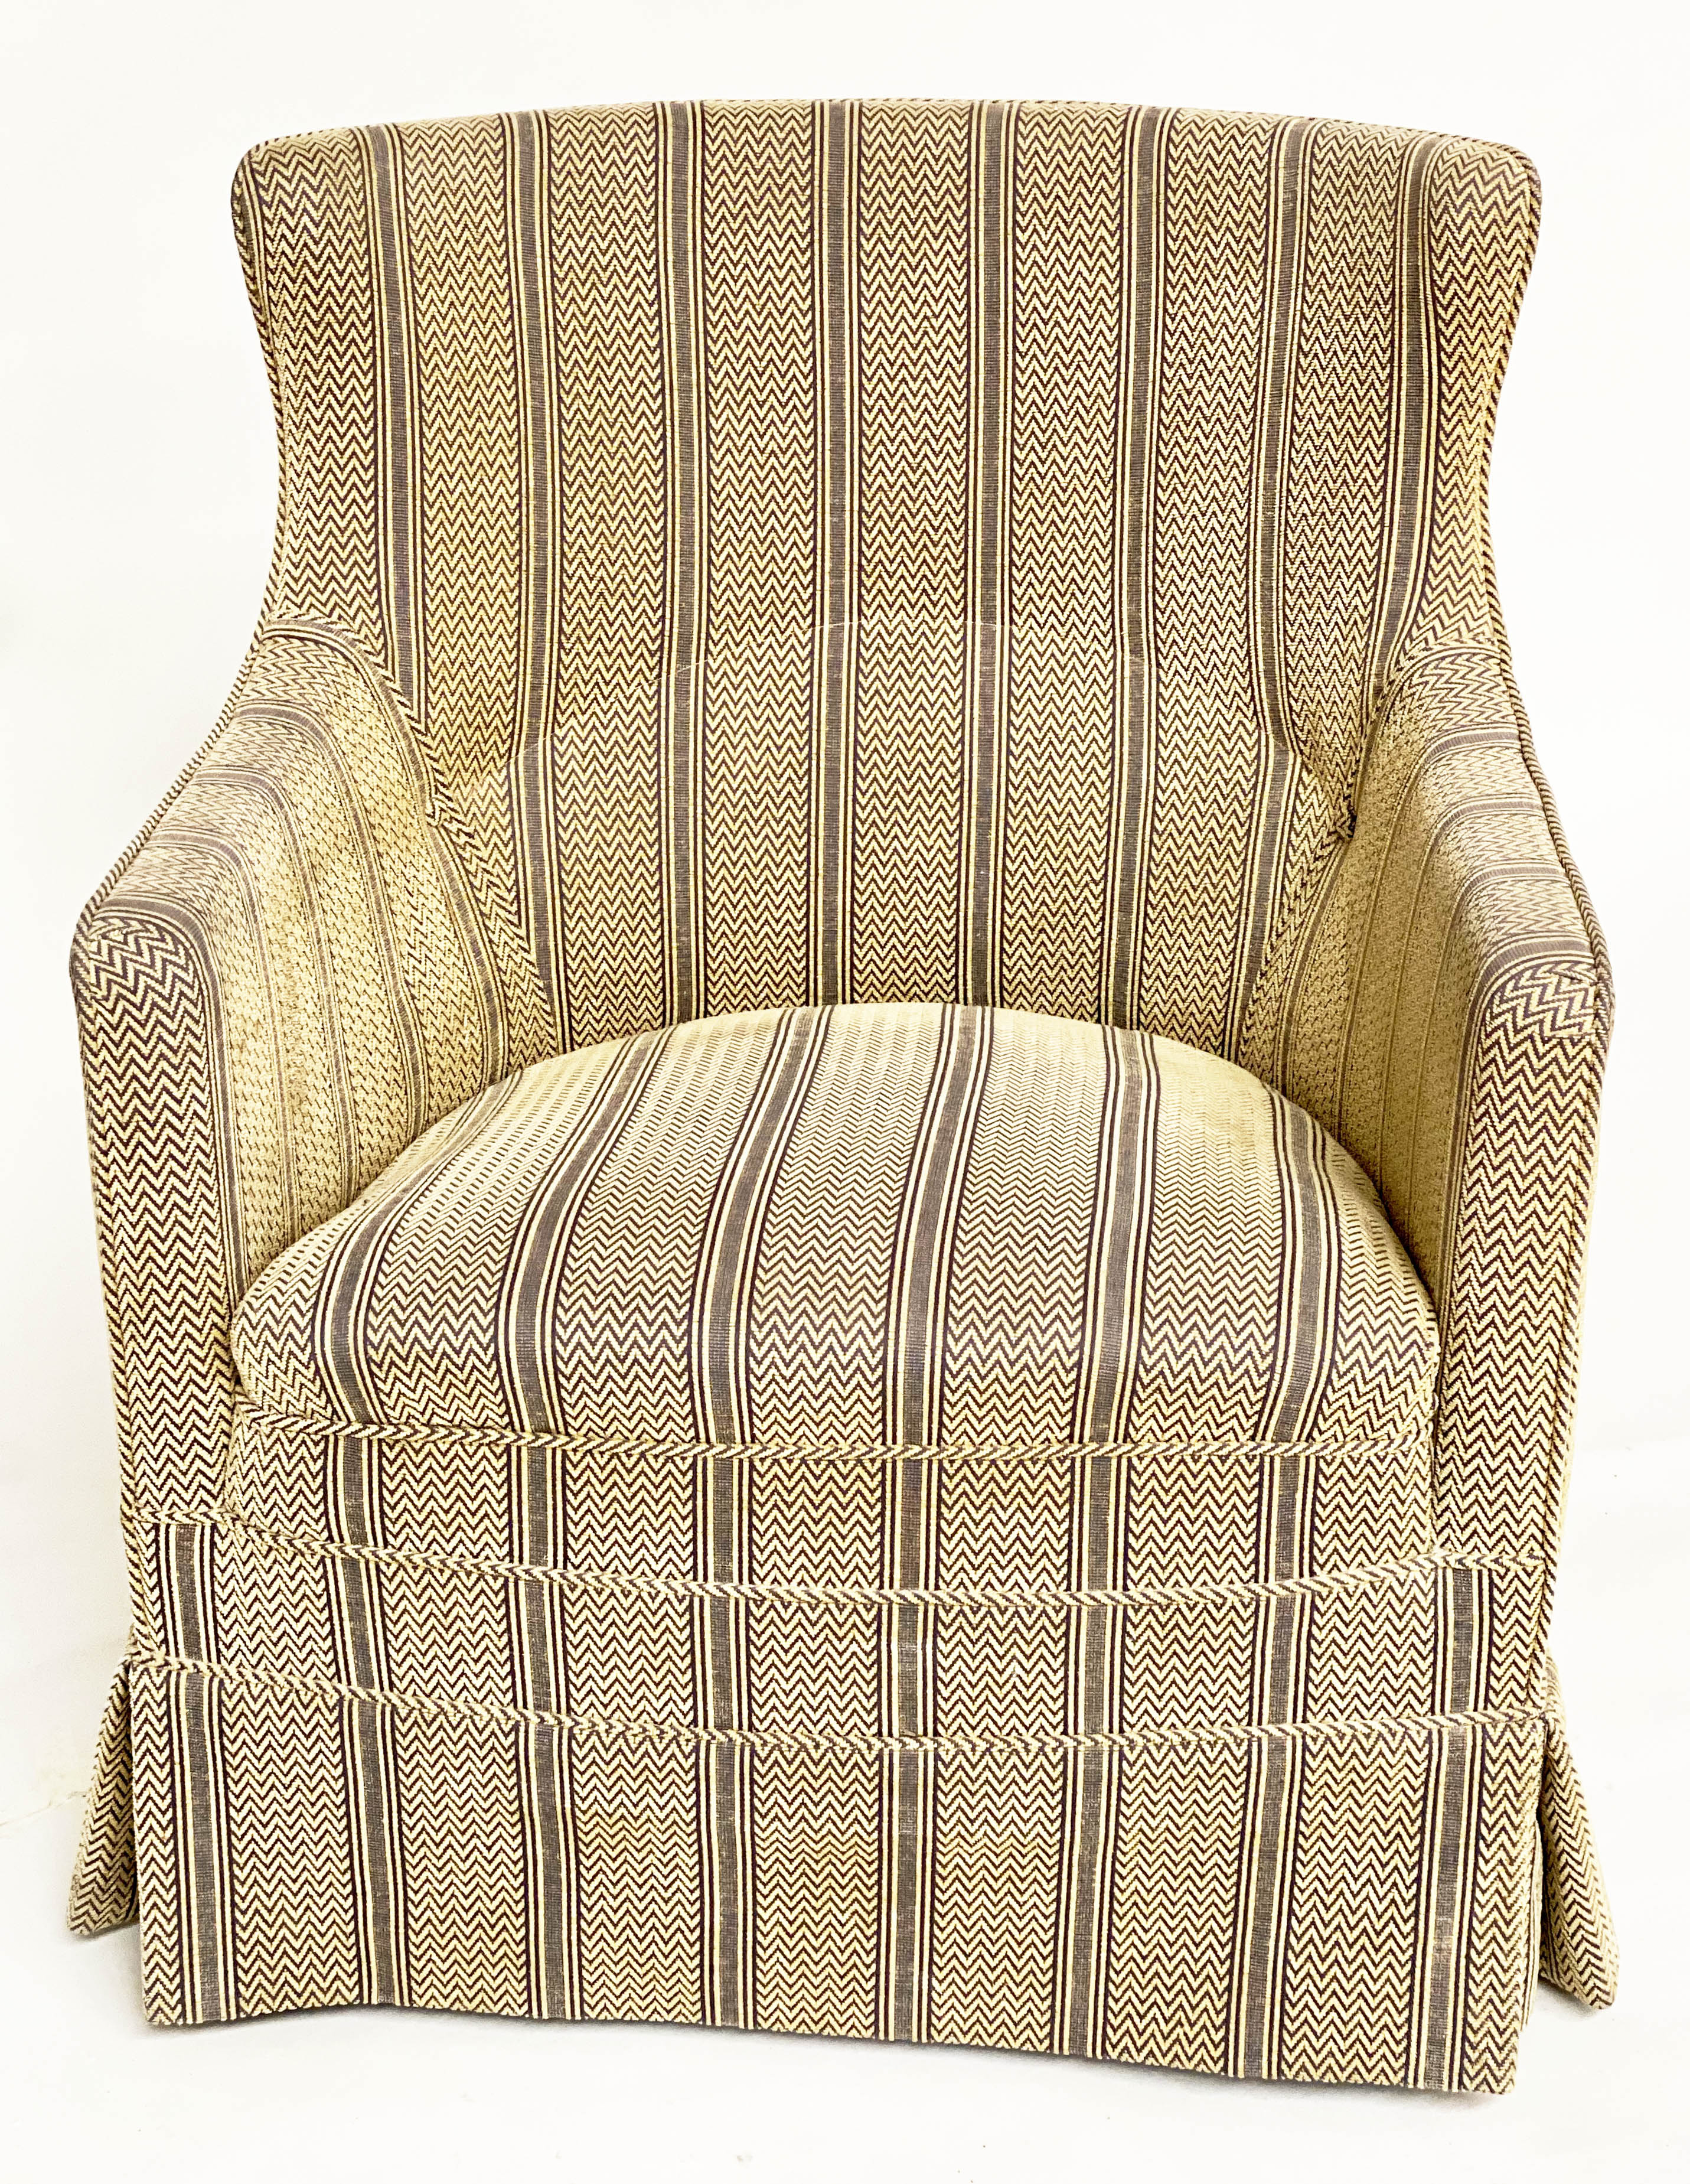 ARMCHAIR, Edwardian style striped herringbone taupe fabric with straight back and skirts, 82cm W. - Bild 9 aus 9